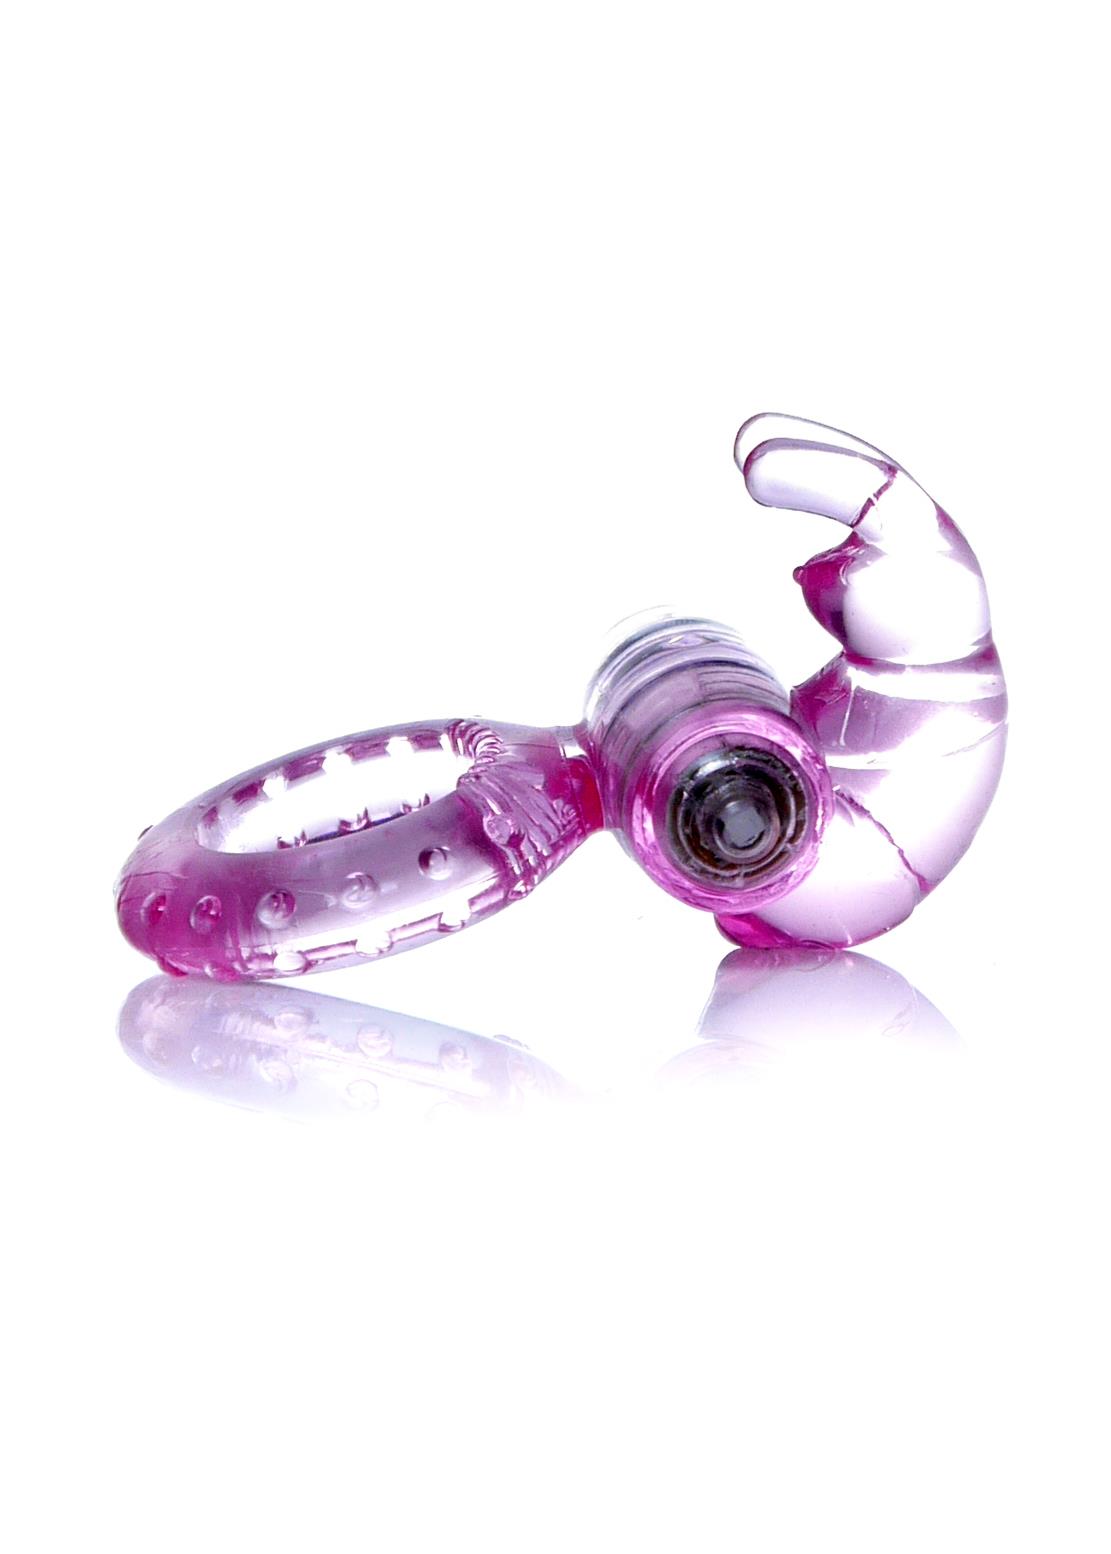 Bossoftoys - 67-00047 - Rabbit Vibrating Cockring  - 7,5 cm - Pink - batteries included - packed in strong blister